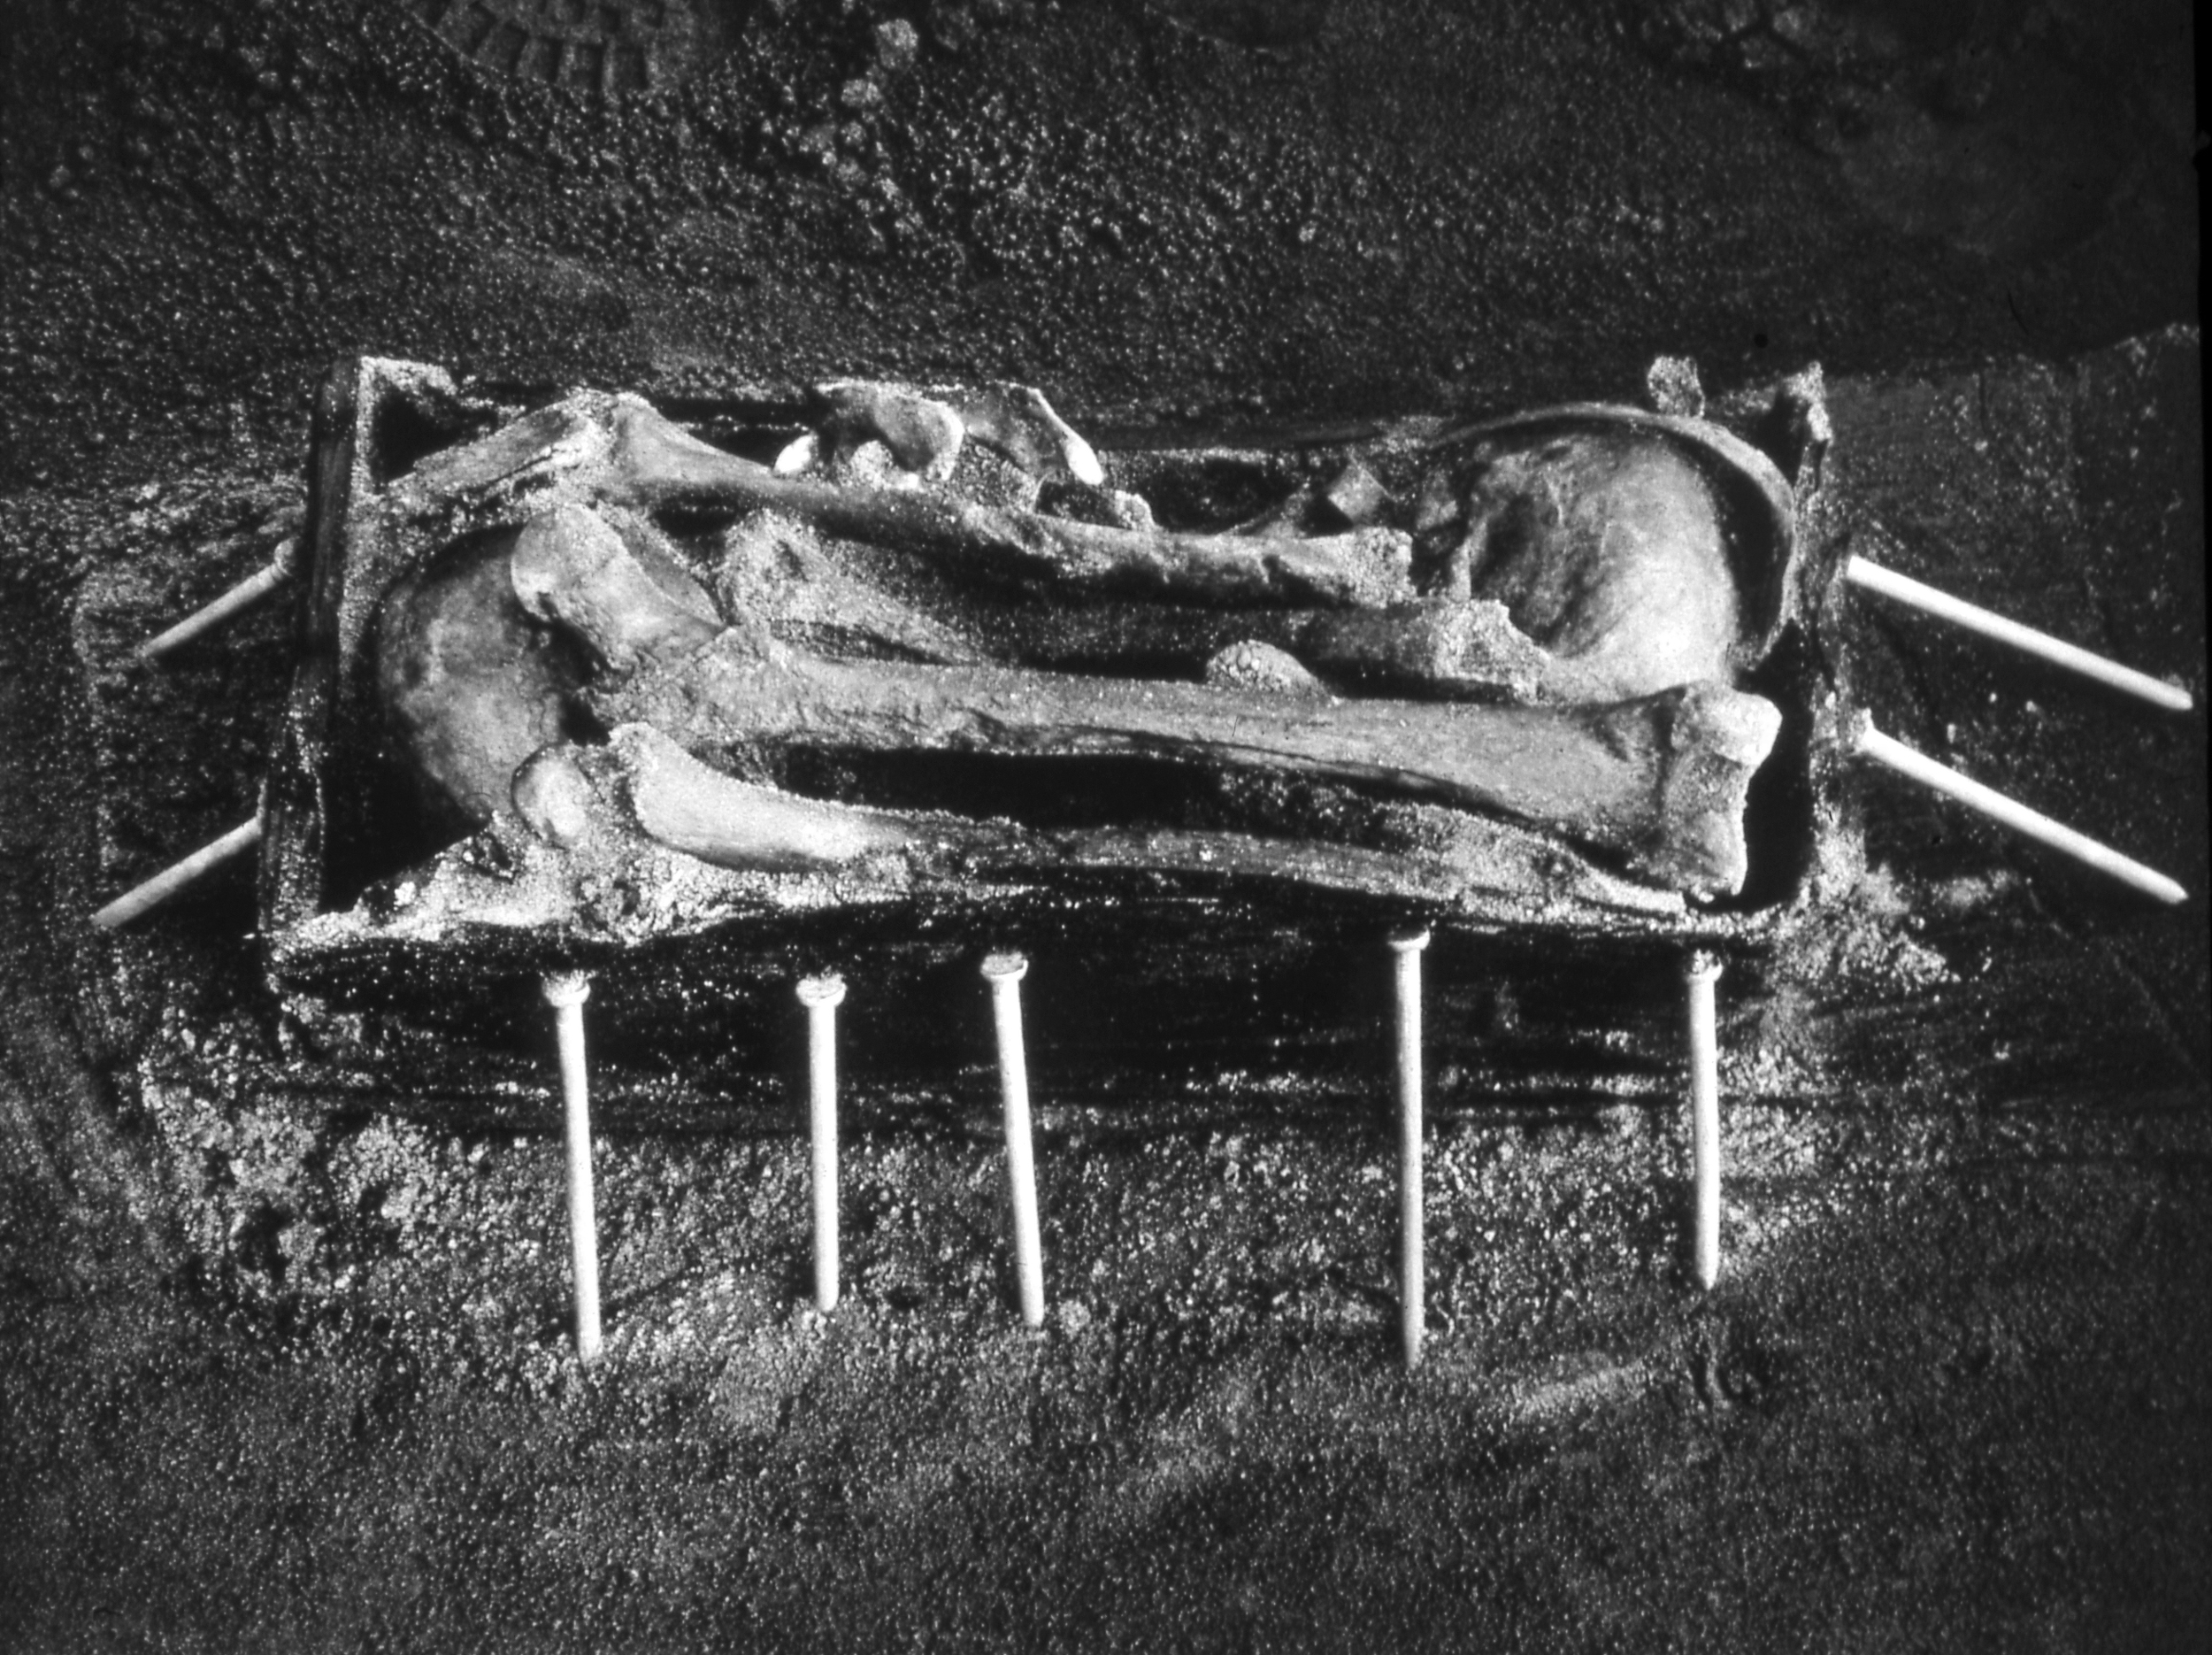  Burial With Nails, 1994 